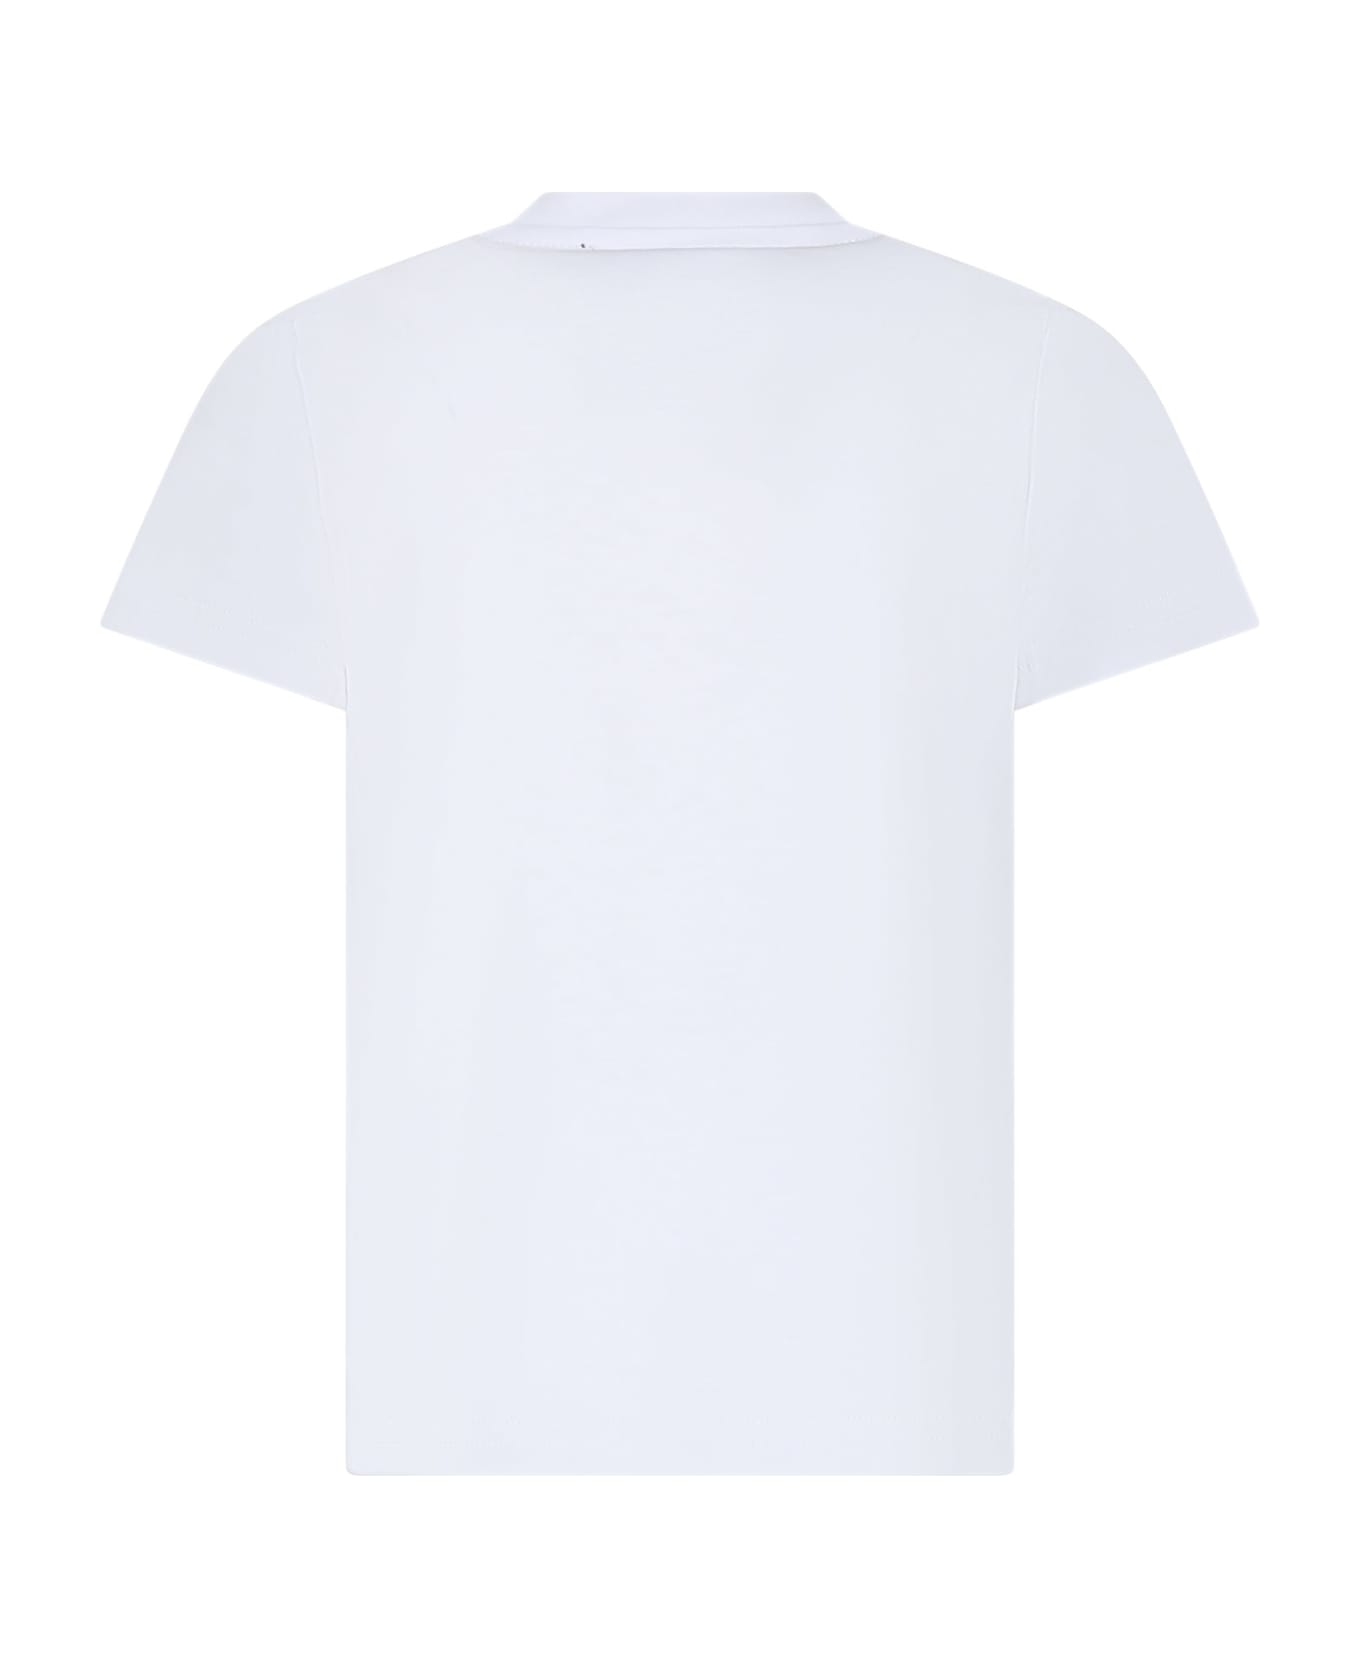 Dsquared2 White T-shirt For Boy With Logo - White